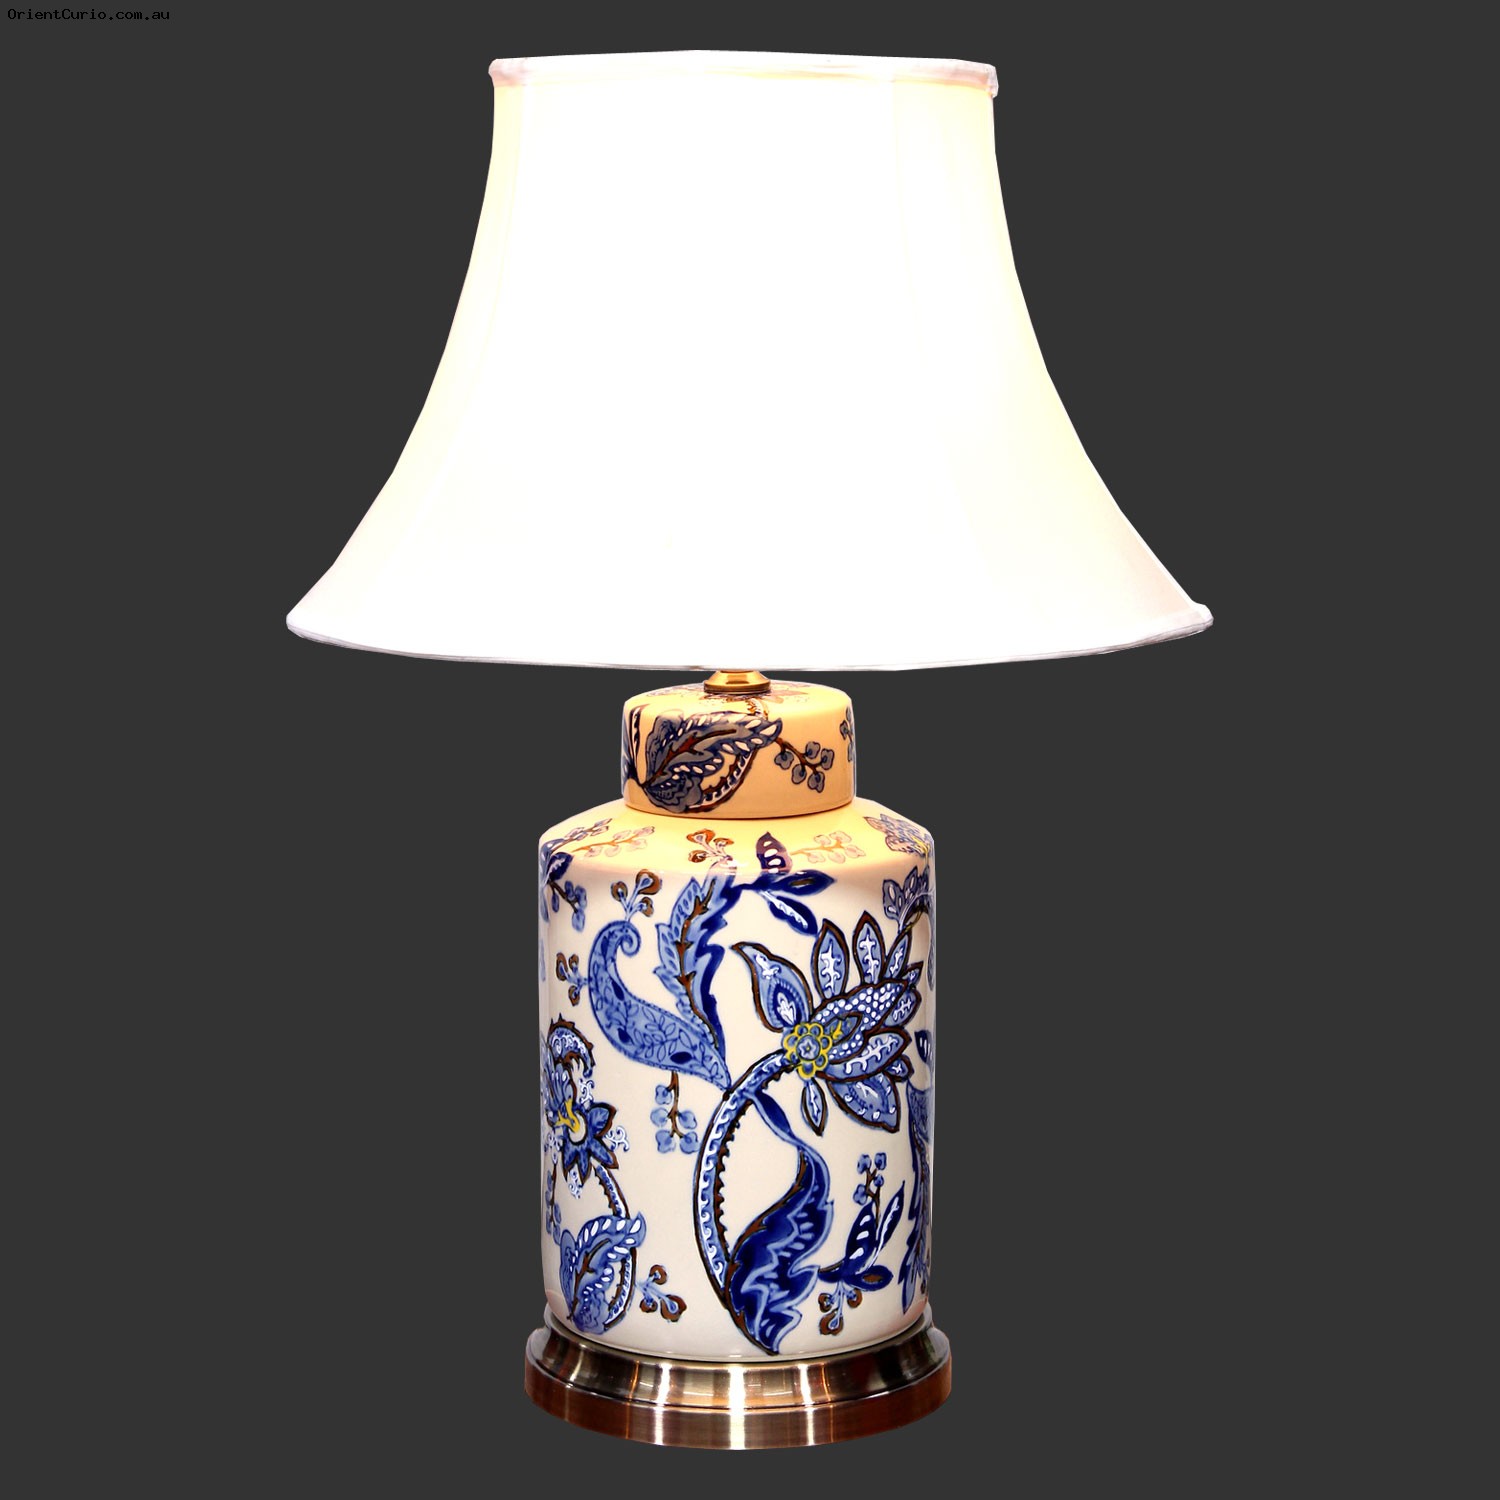 Page 1 Lighting Orient Curio, Chinese Ceramic Table Lamps Australia